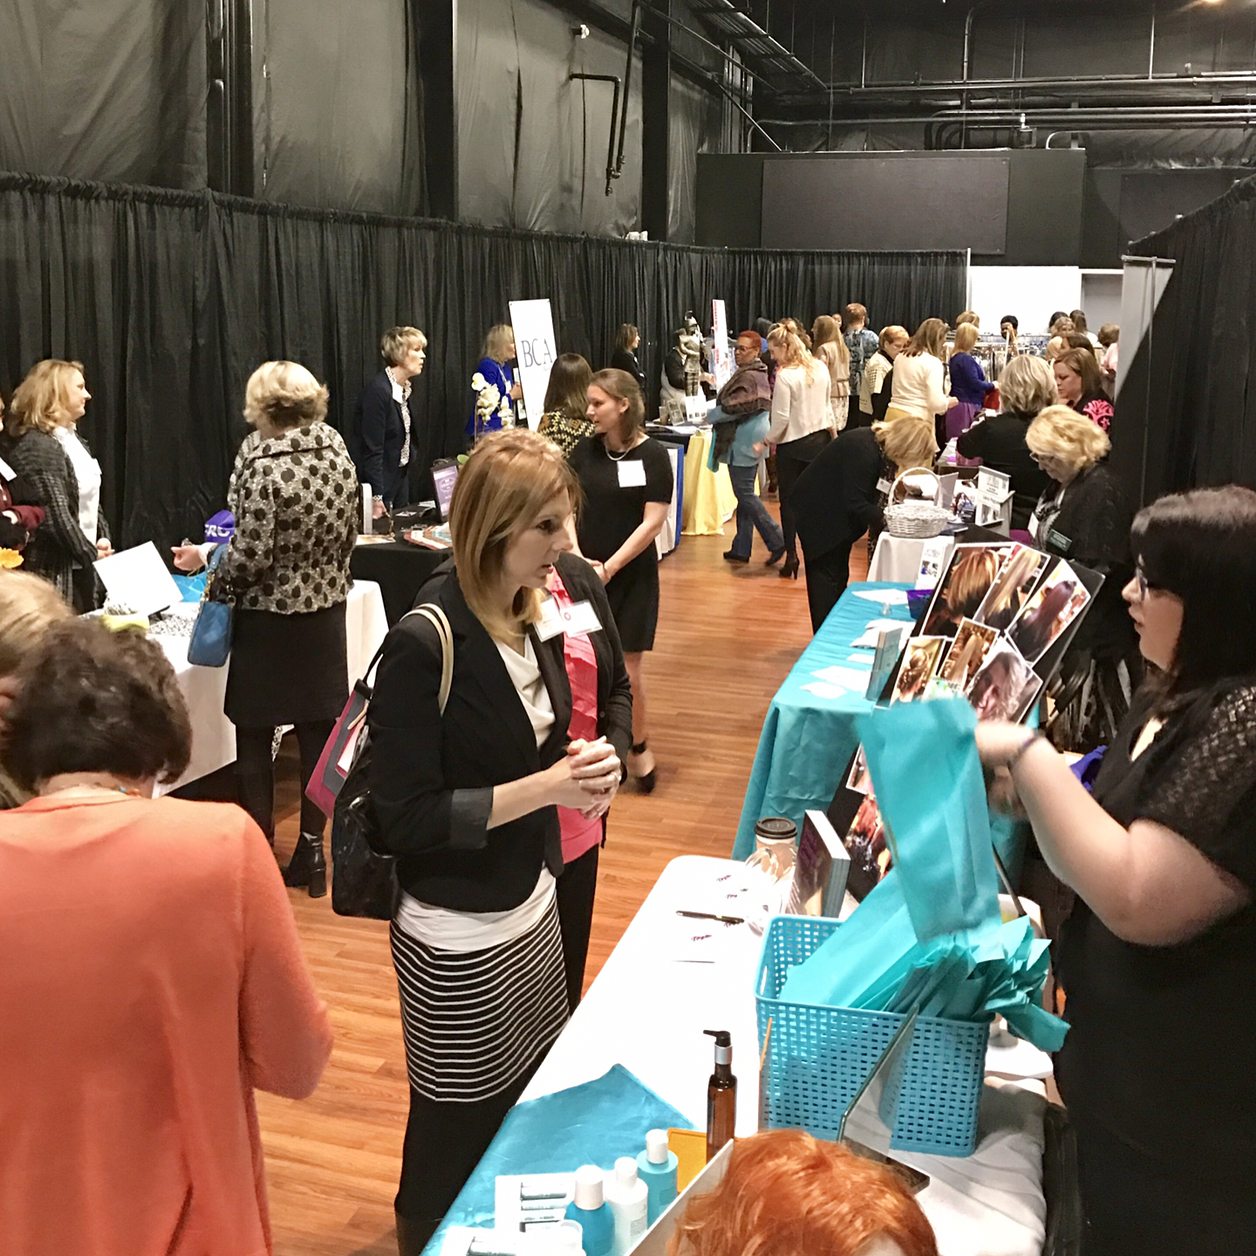 The Vendor area at the Women’s Symposium is buzzing with networking